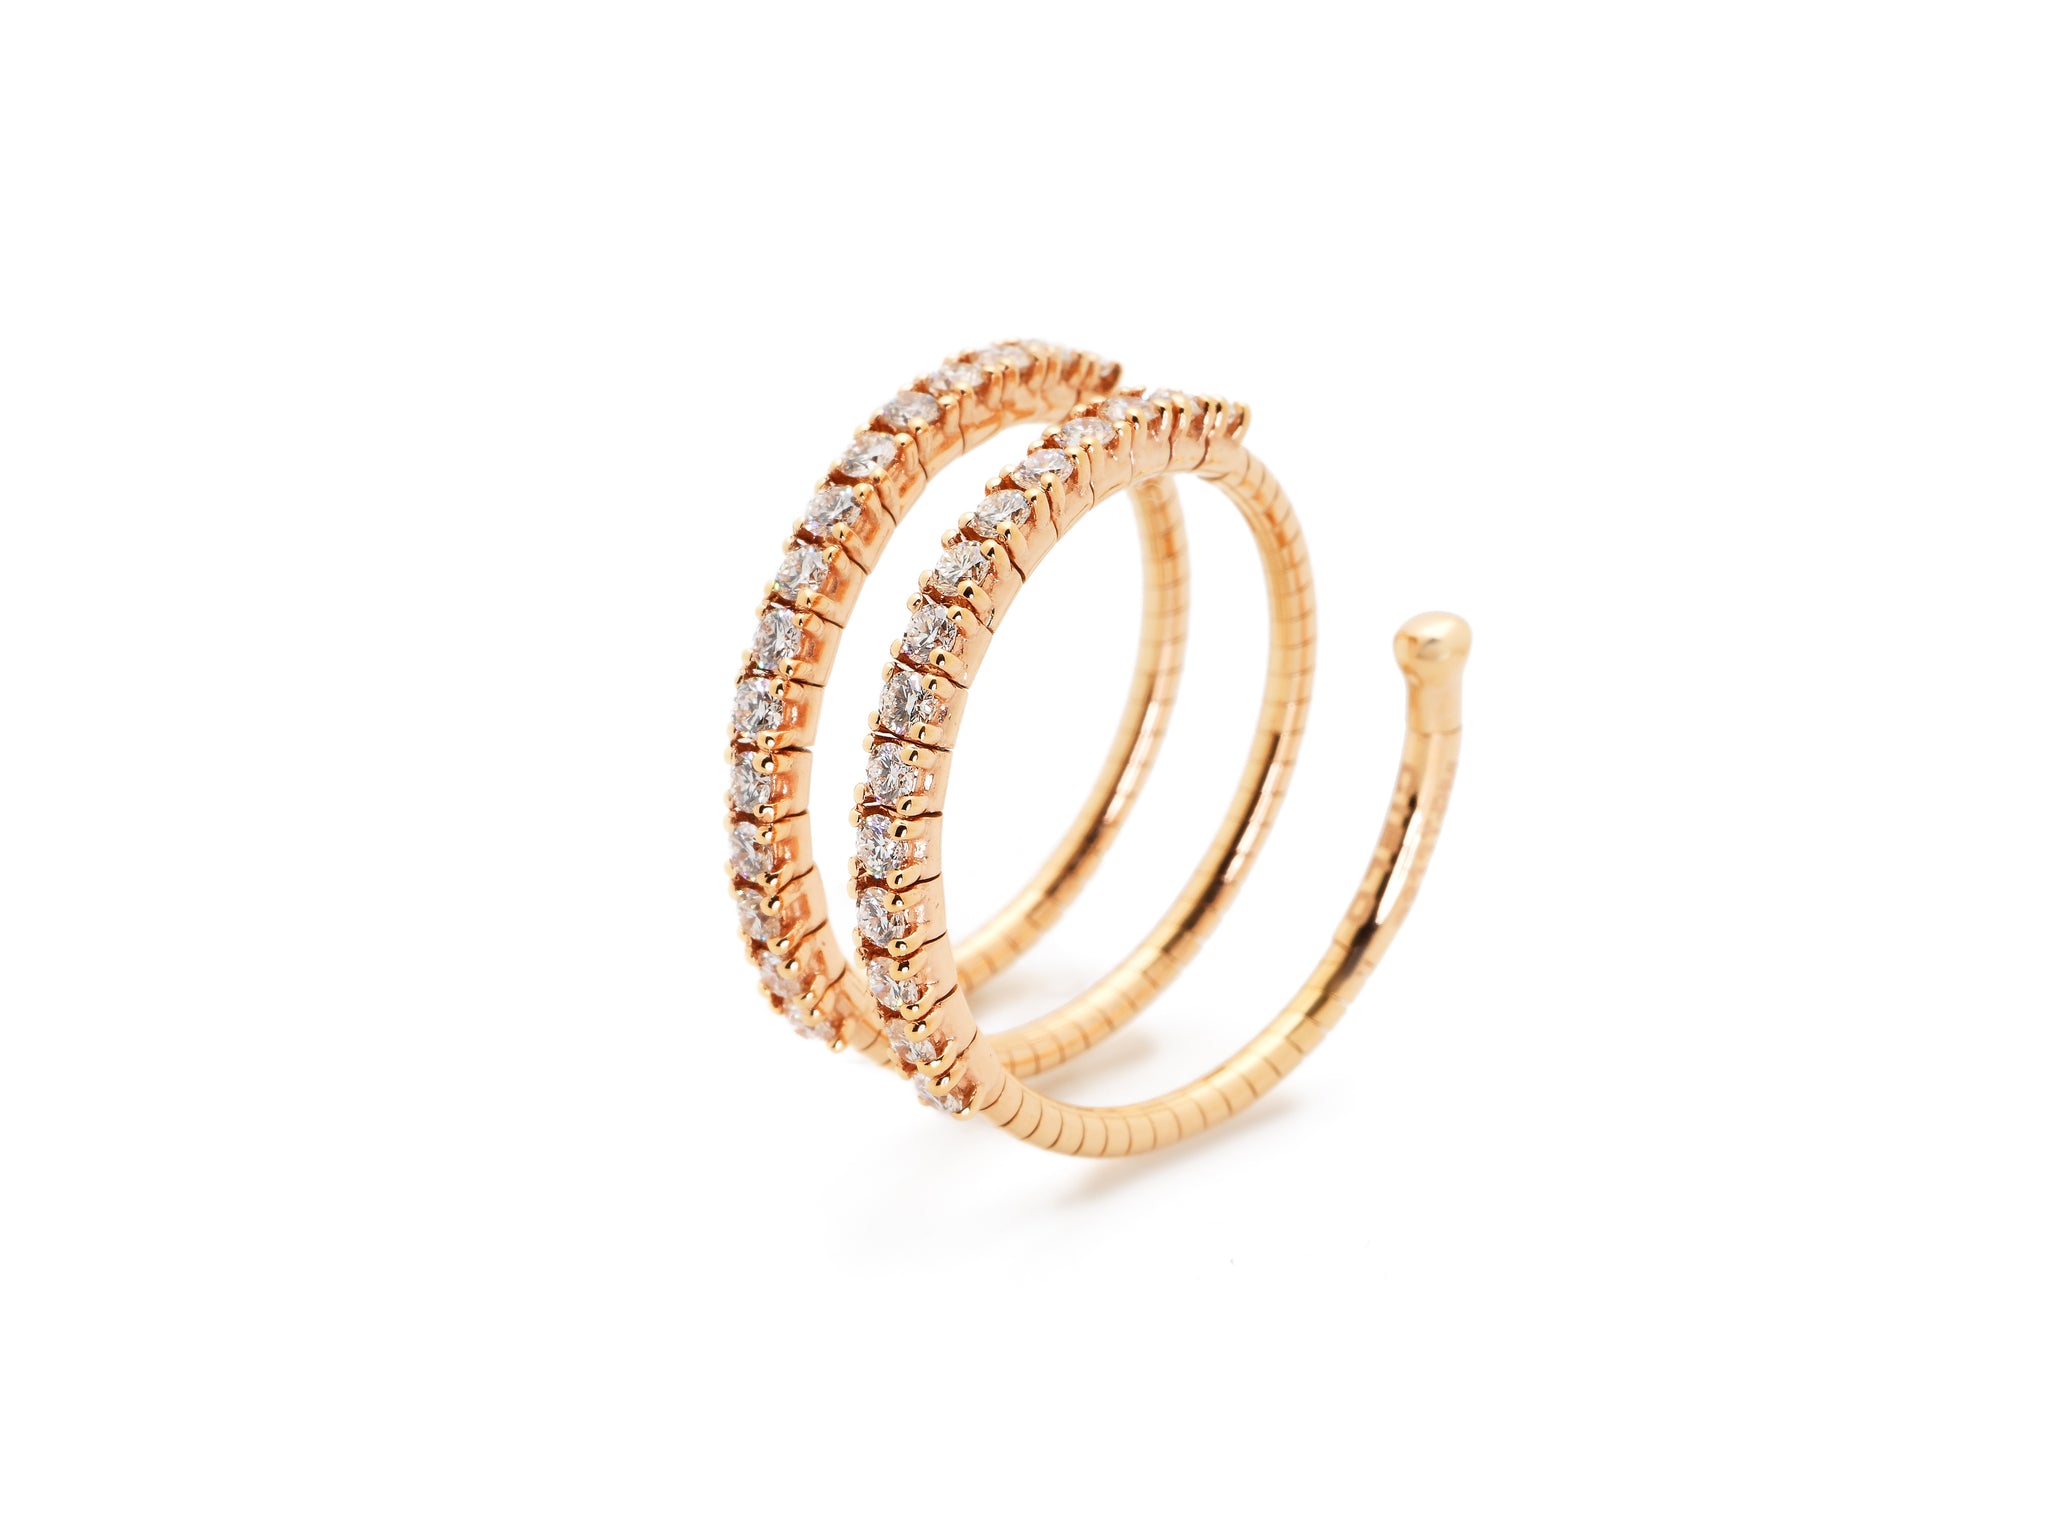 18 krt red gold flexible ring set with 30 brilliant diamonds